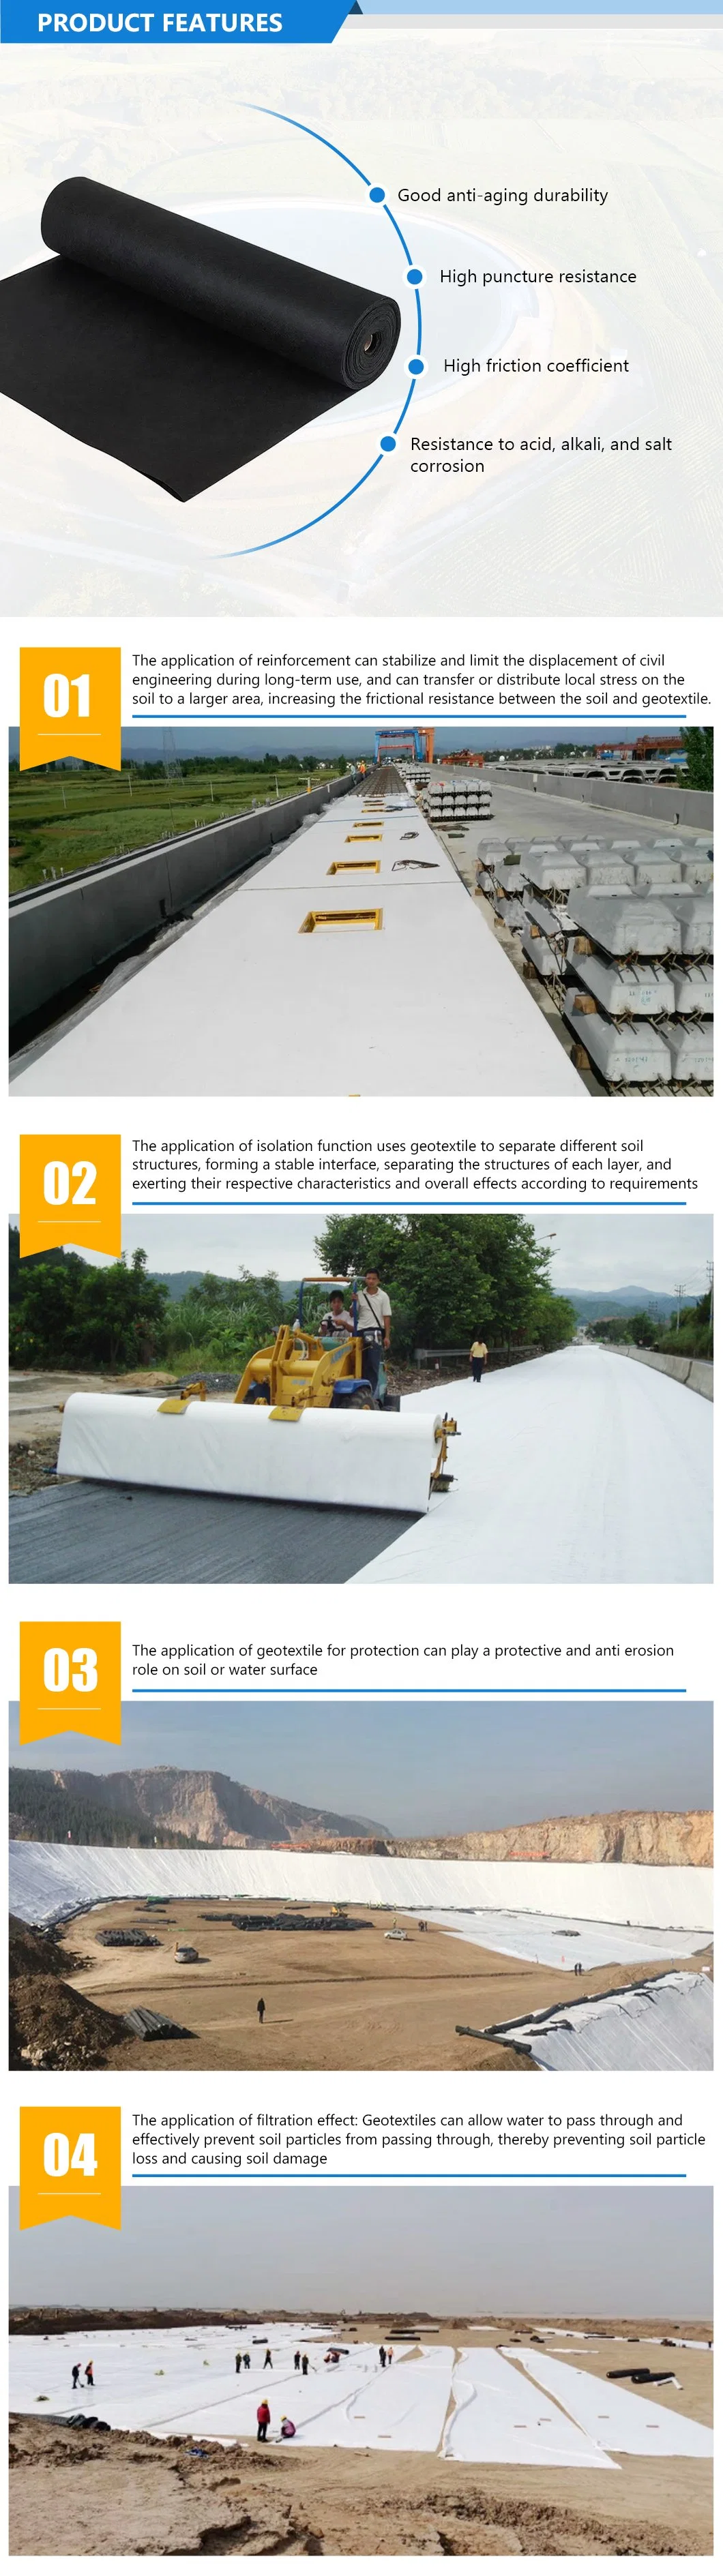 Geotextile Filter Fabric for Slope Dam 300g Fabric Non Woven Geotextile Construction